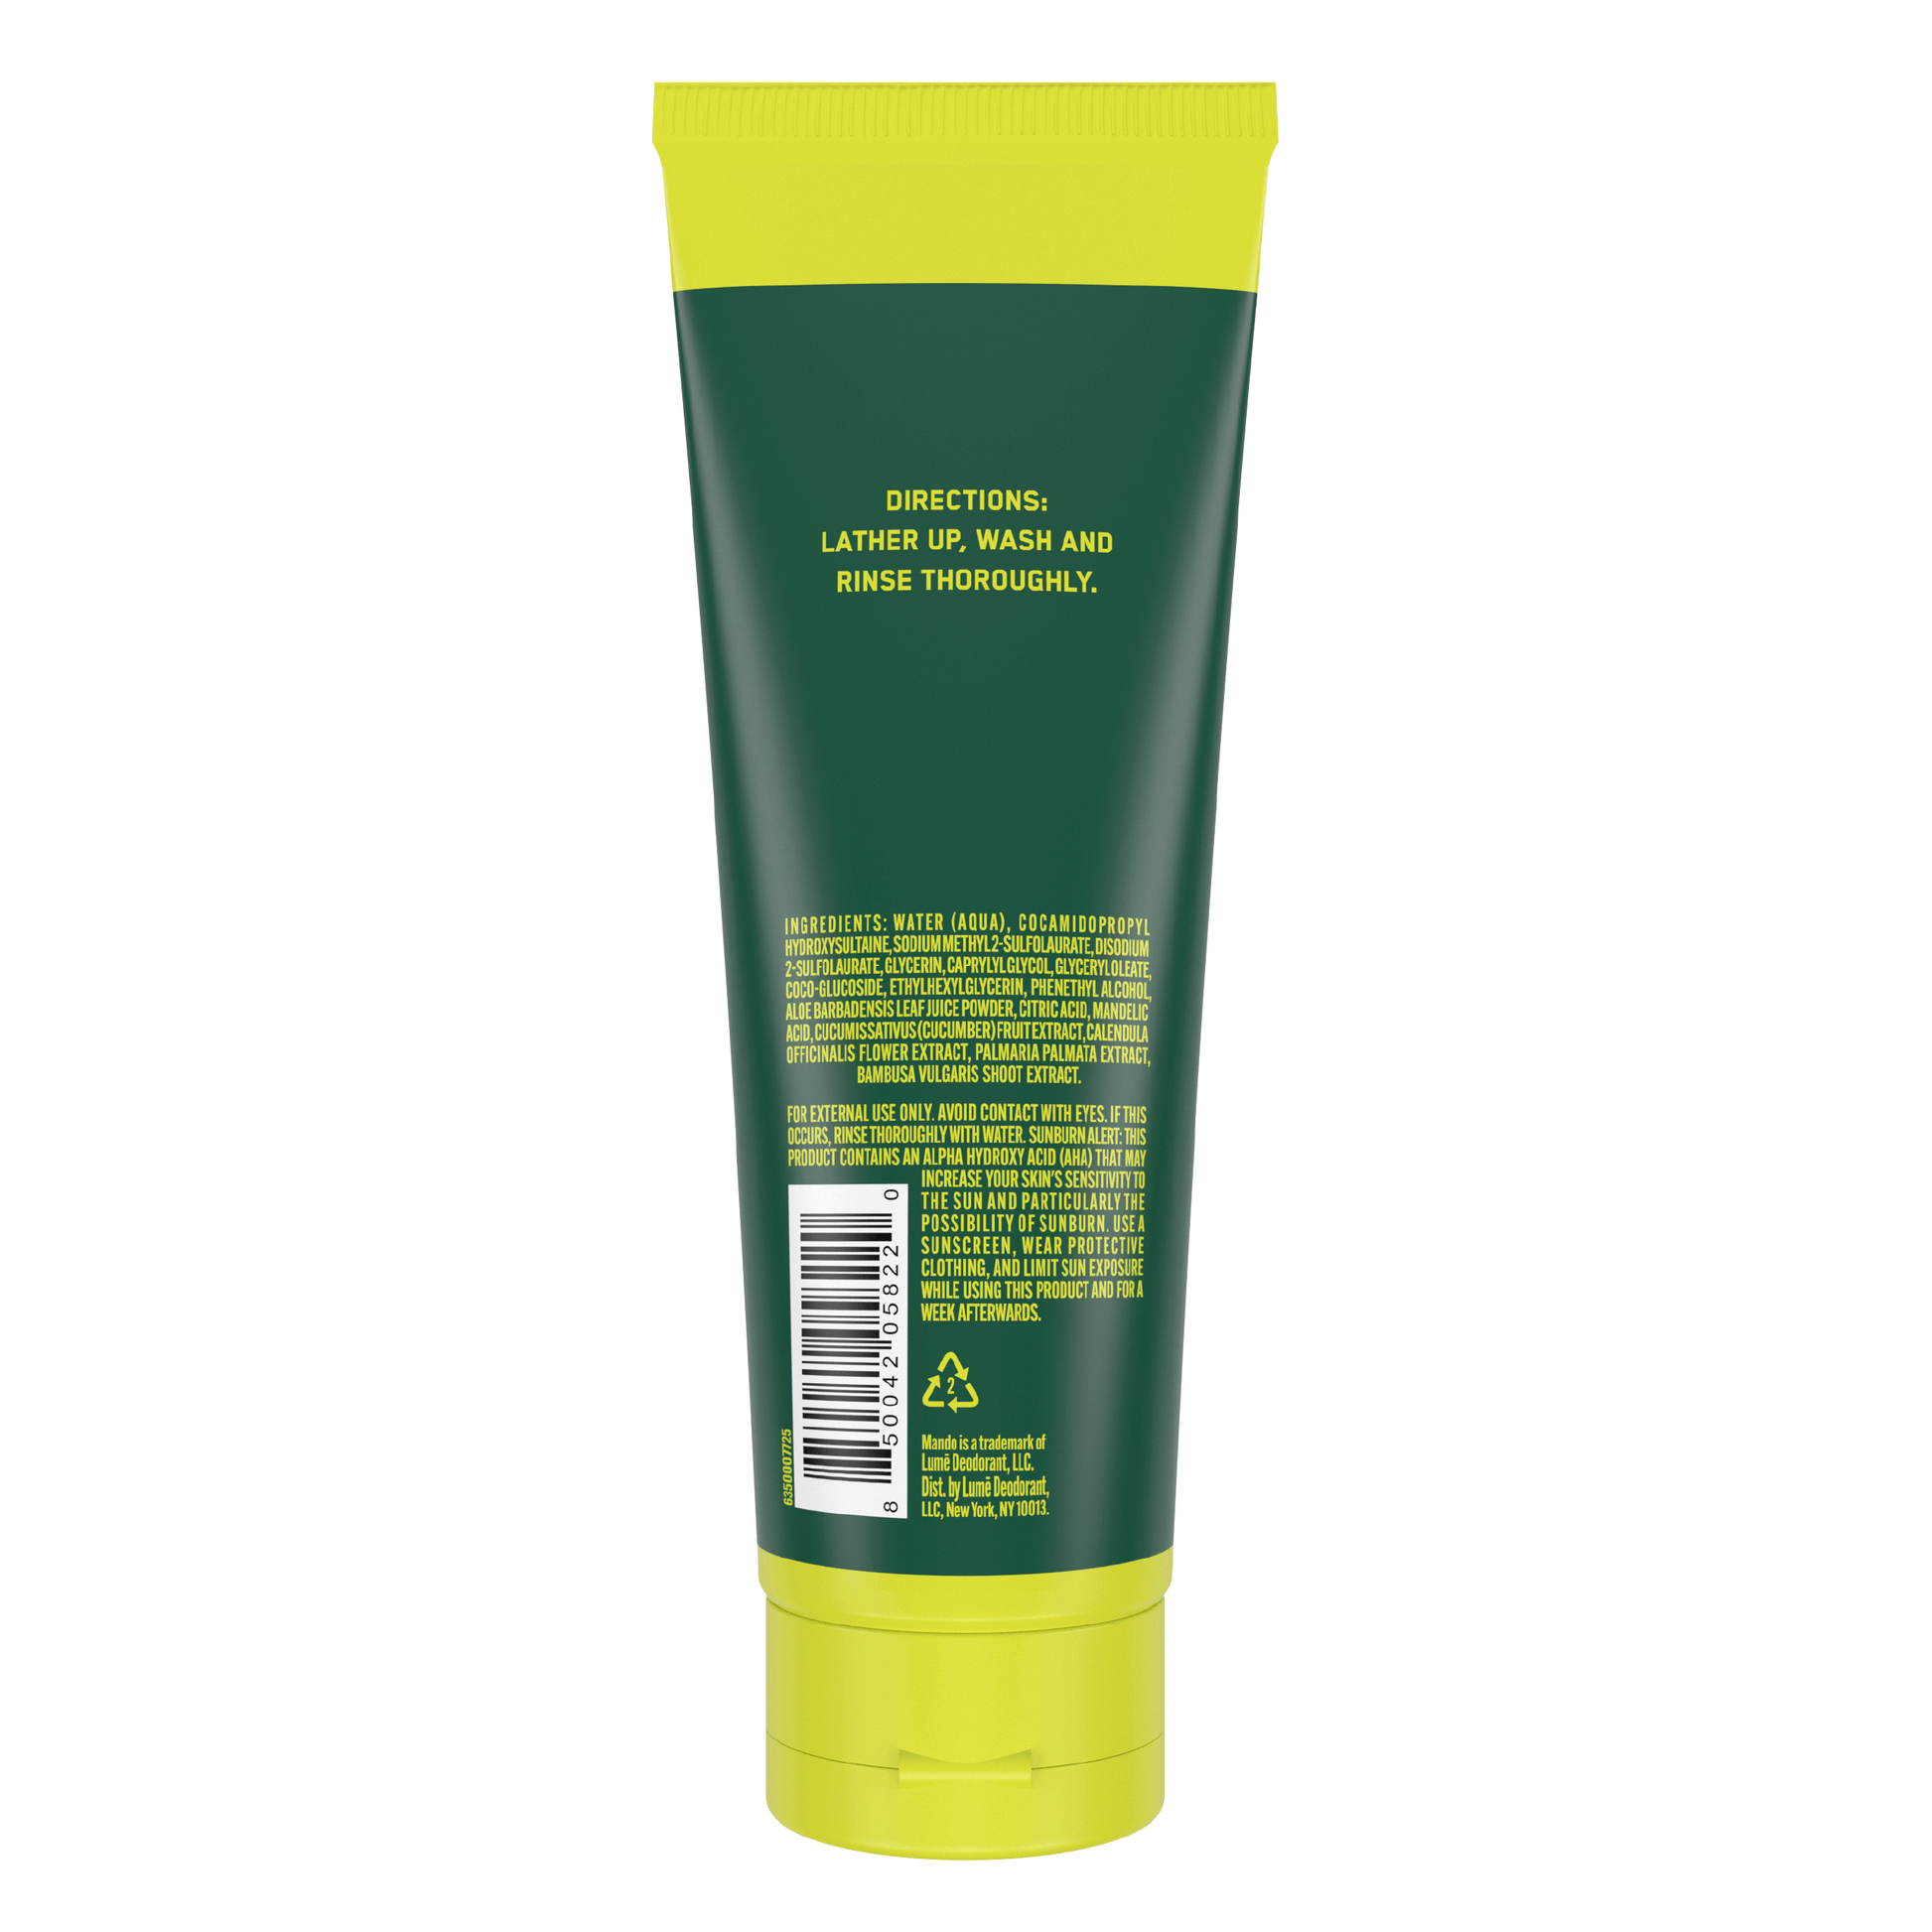 yellow green Bar of Mando body wash in Mt Fuji scent with directions text